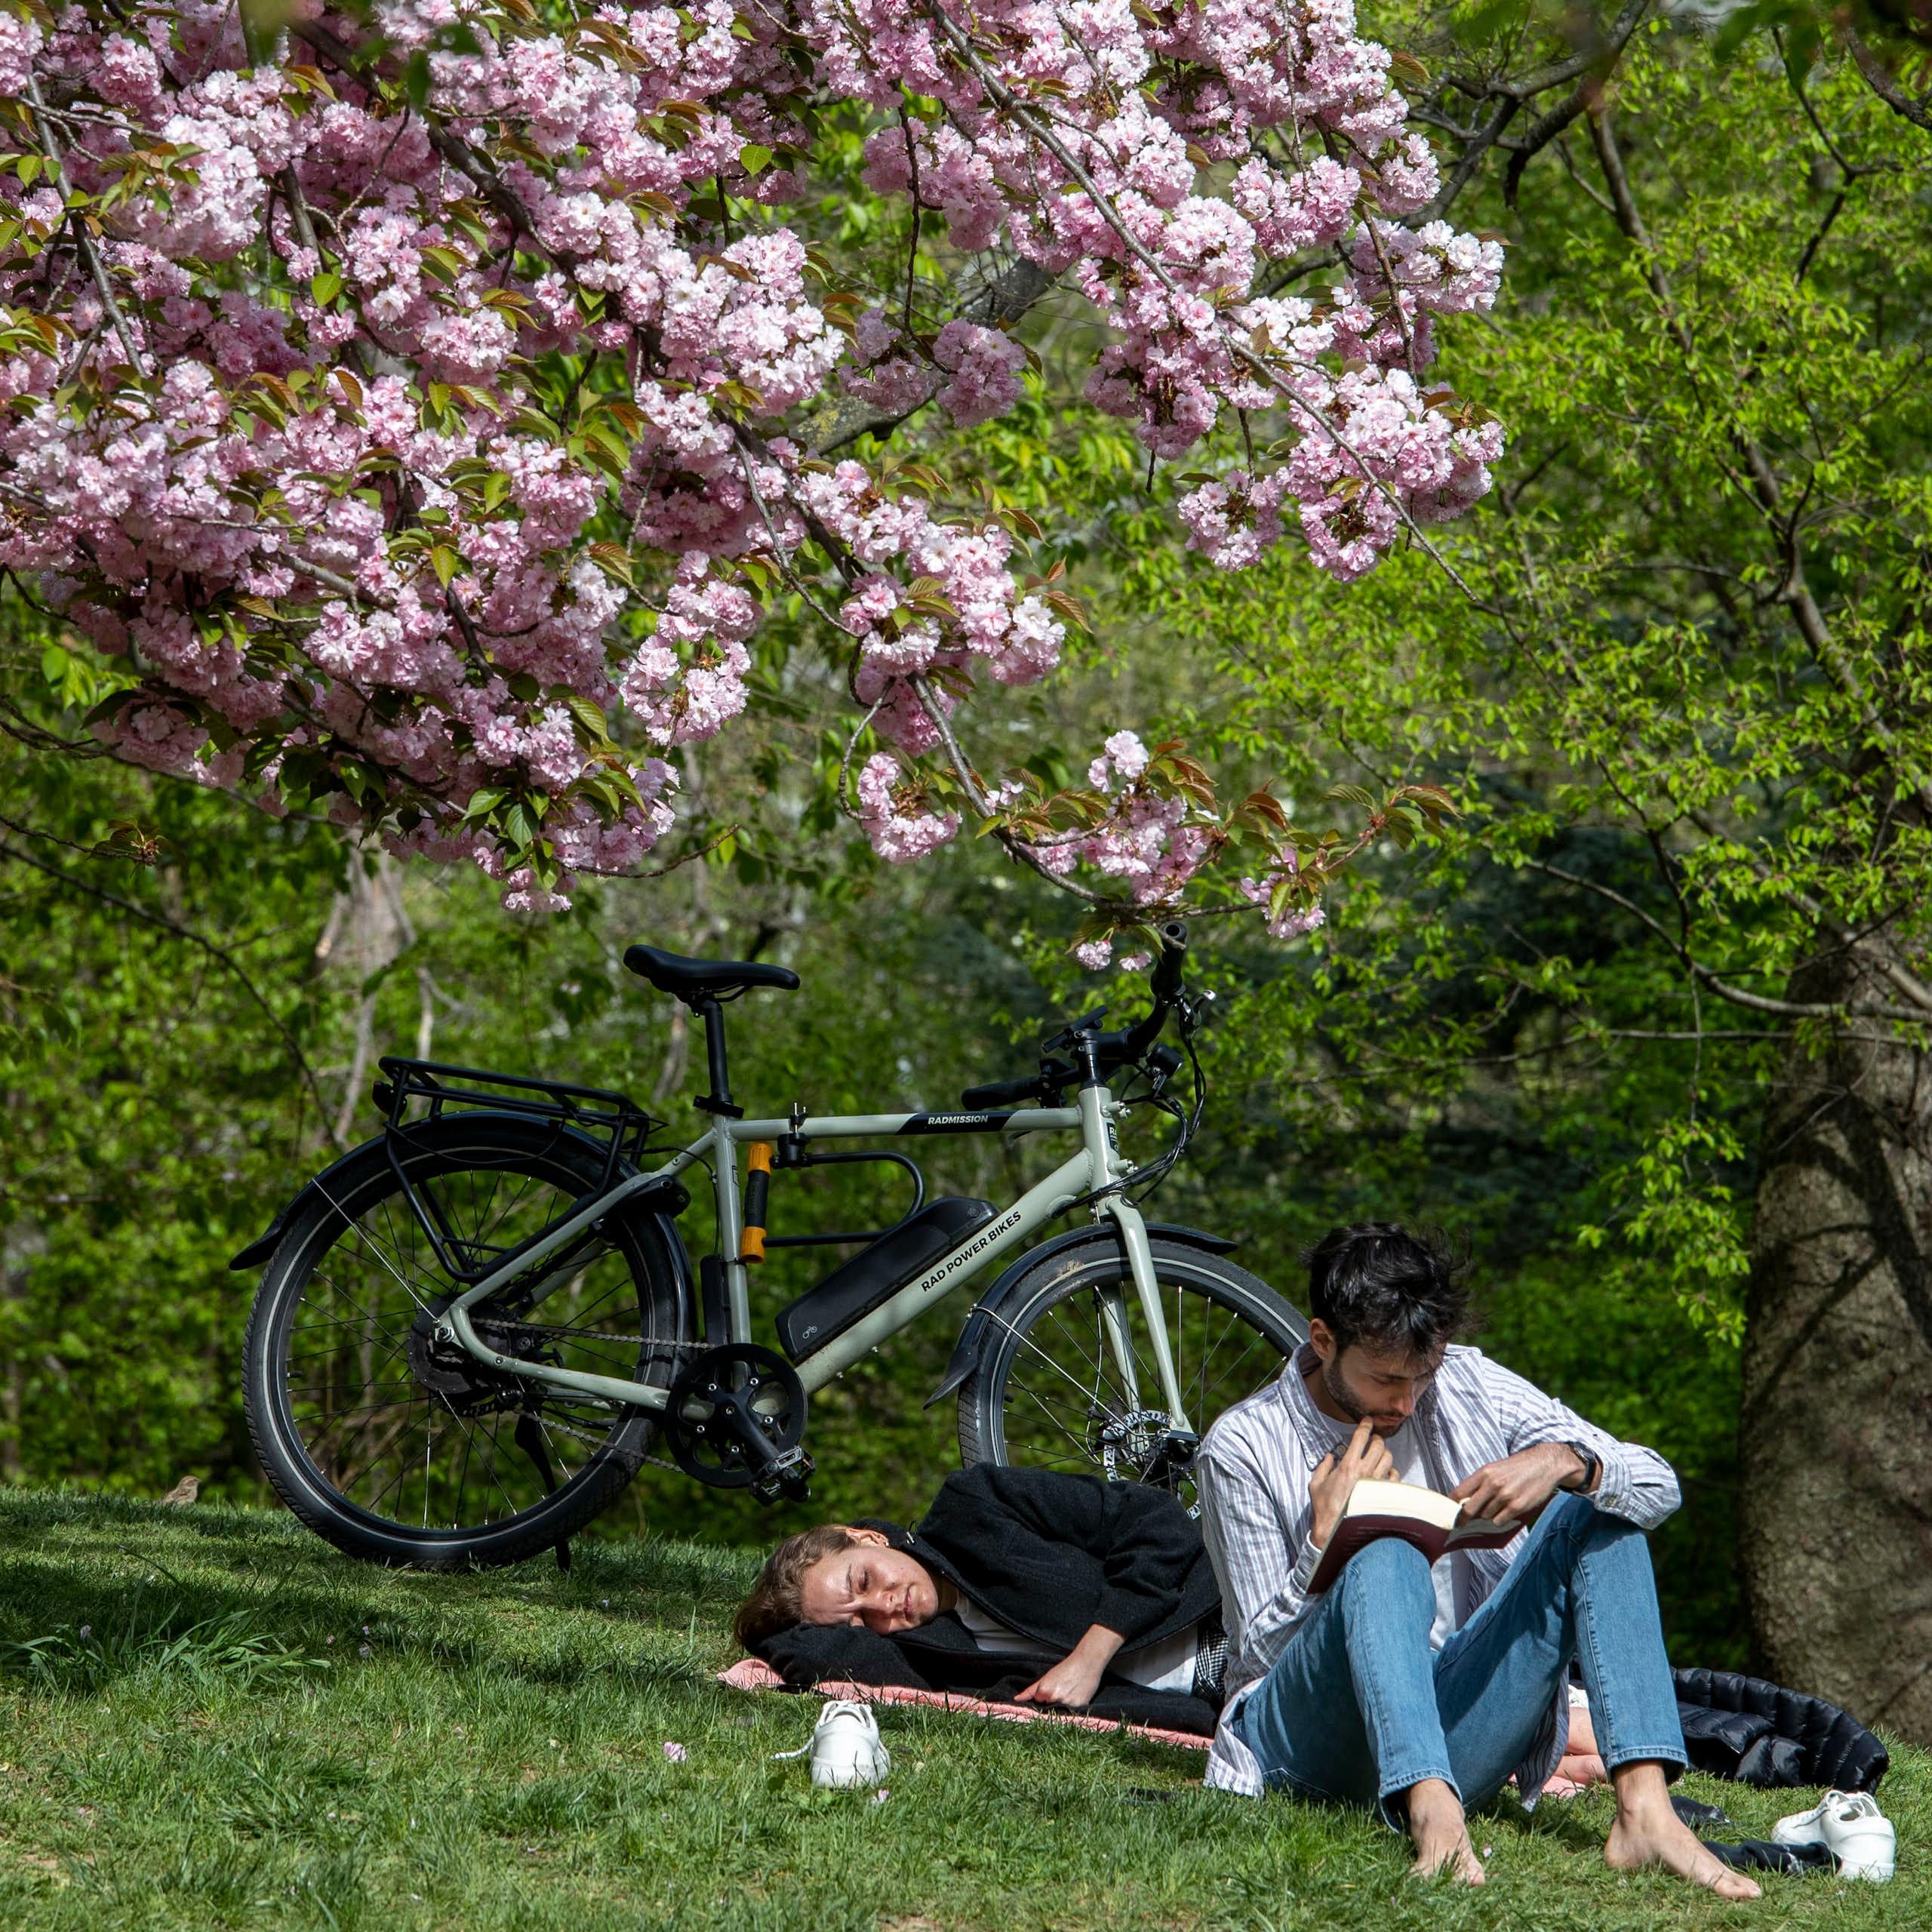 Two people resting under a flowering cherry tree with a bicycle propped nearby.